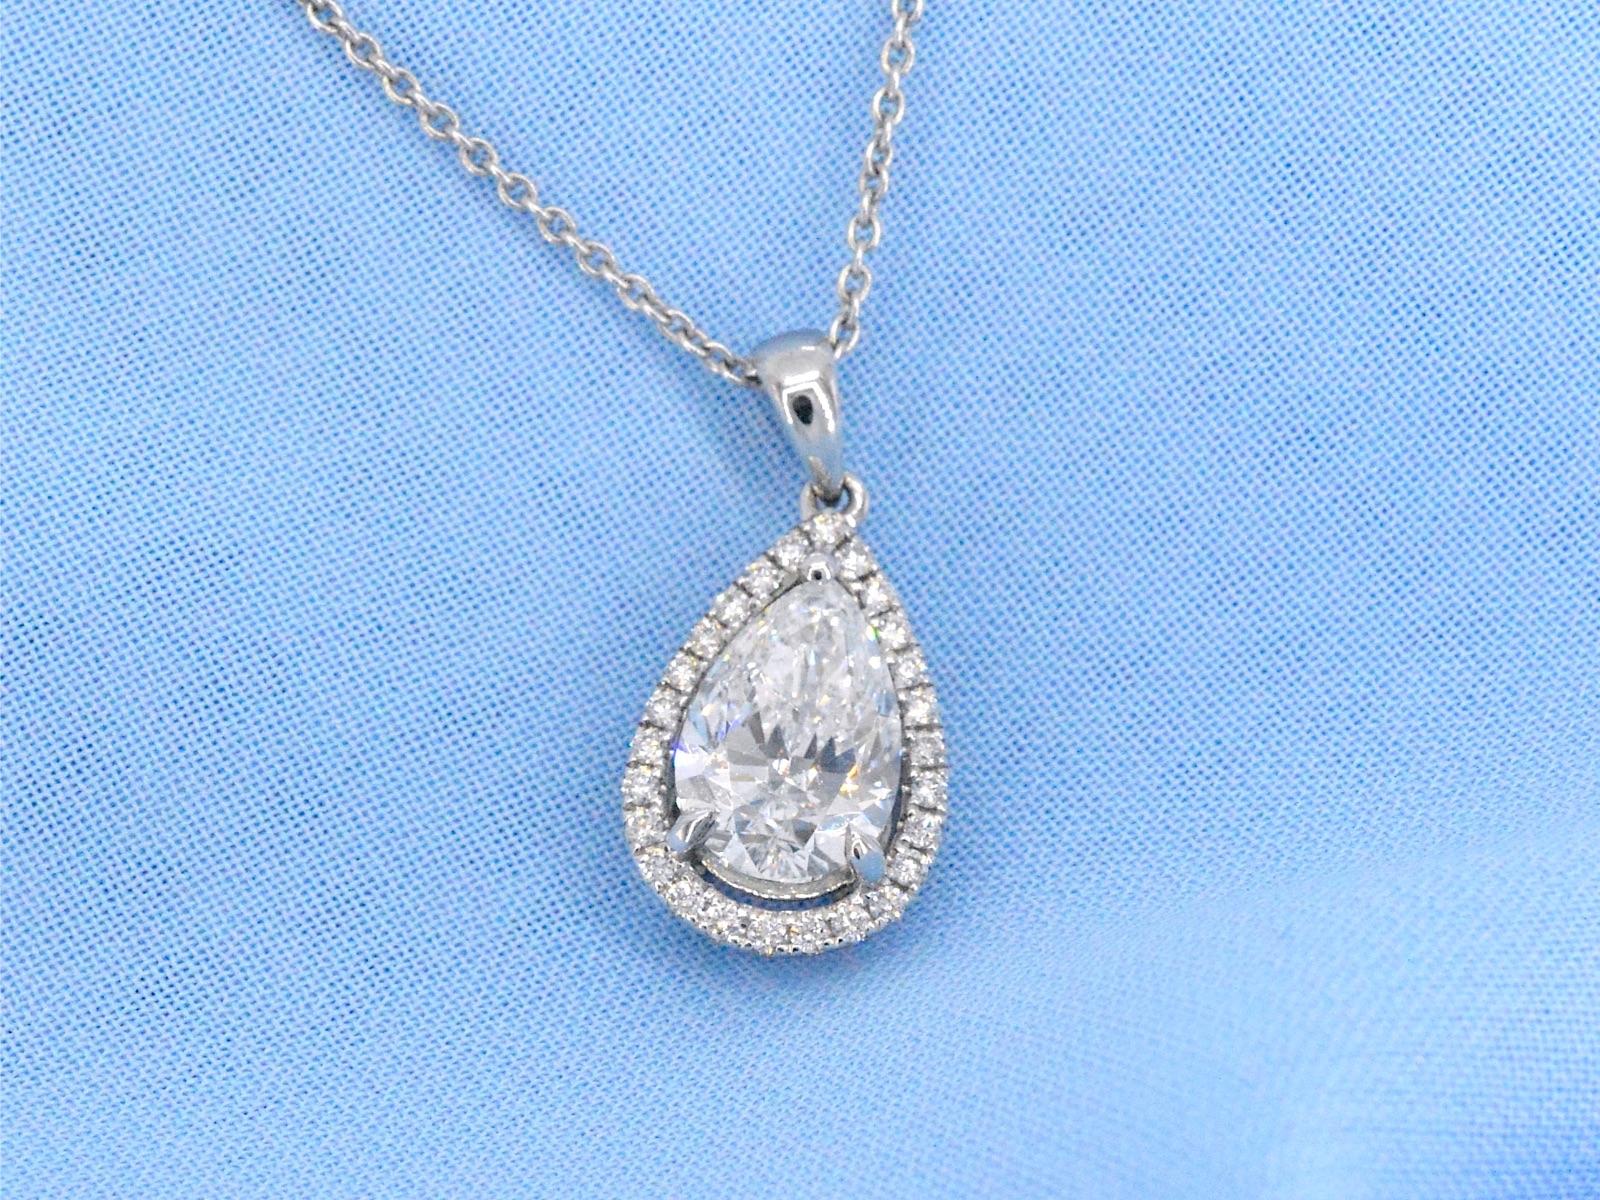 Experience the enchantment of this exquisite pendant, featuring a captivating pear-cut diamond weighing 2.01 carats. With a pristine E color and SI2 clarity, the diamond radiates a pure and sophisticated allure. Accompanied by 25 brilliant-cut